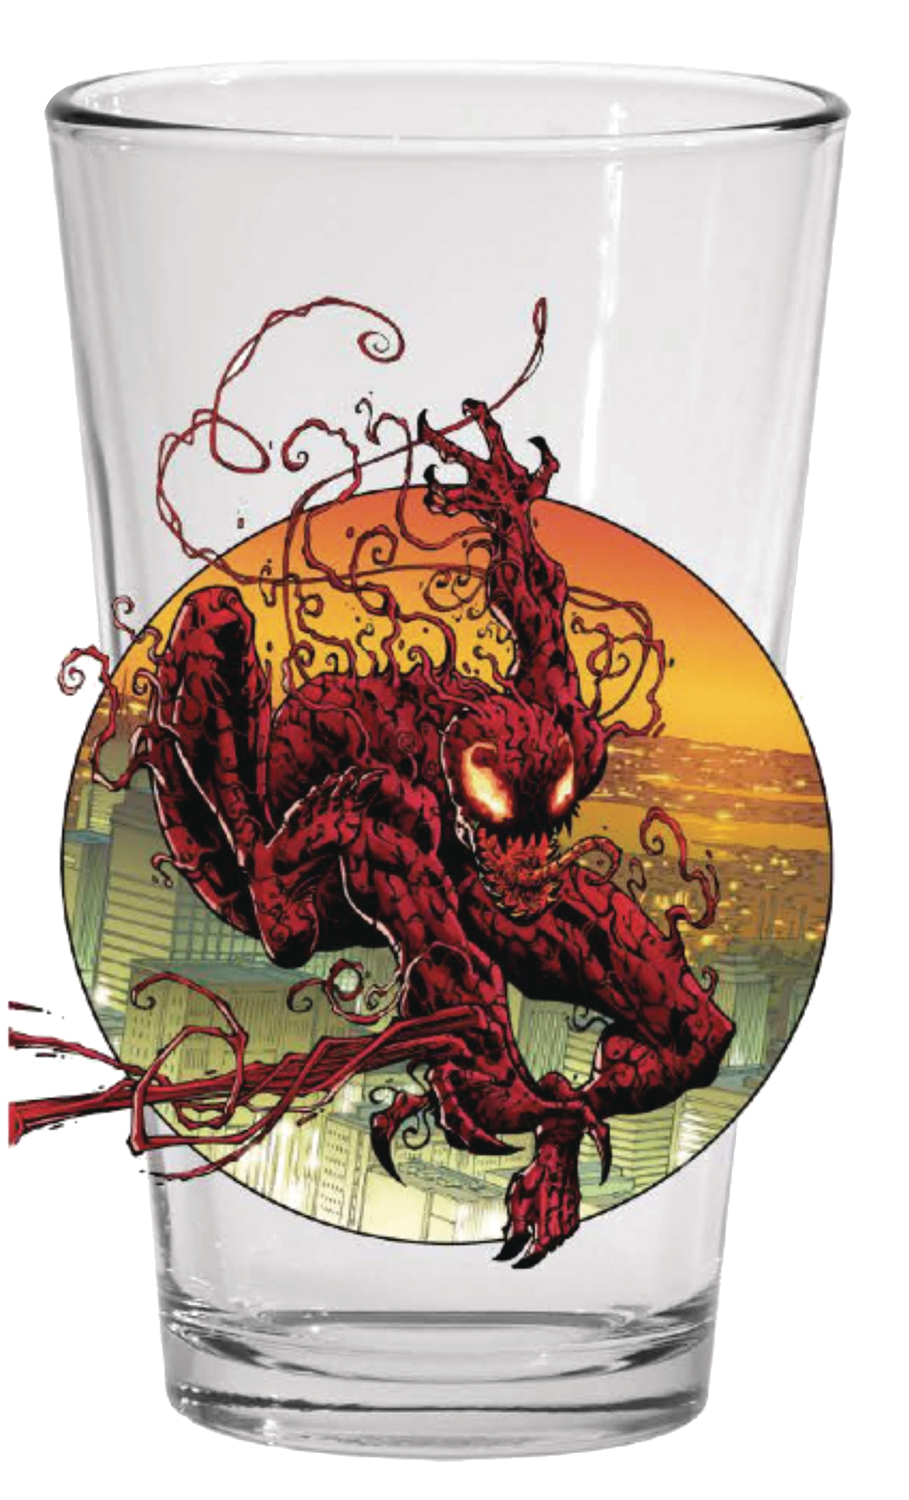 Buy Toon Tumblers Marvel Sm 300 Carnage Pint Glass